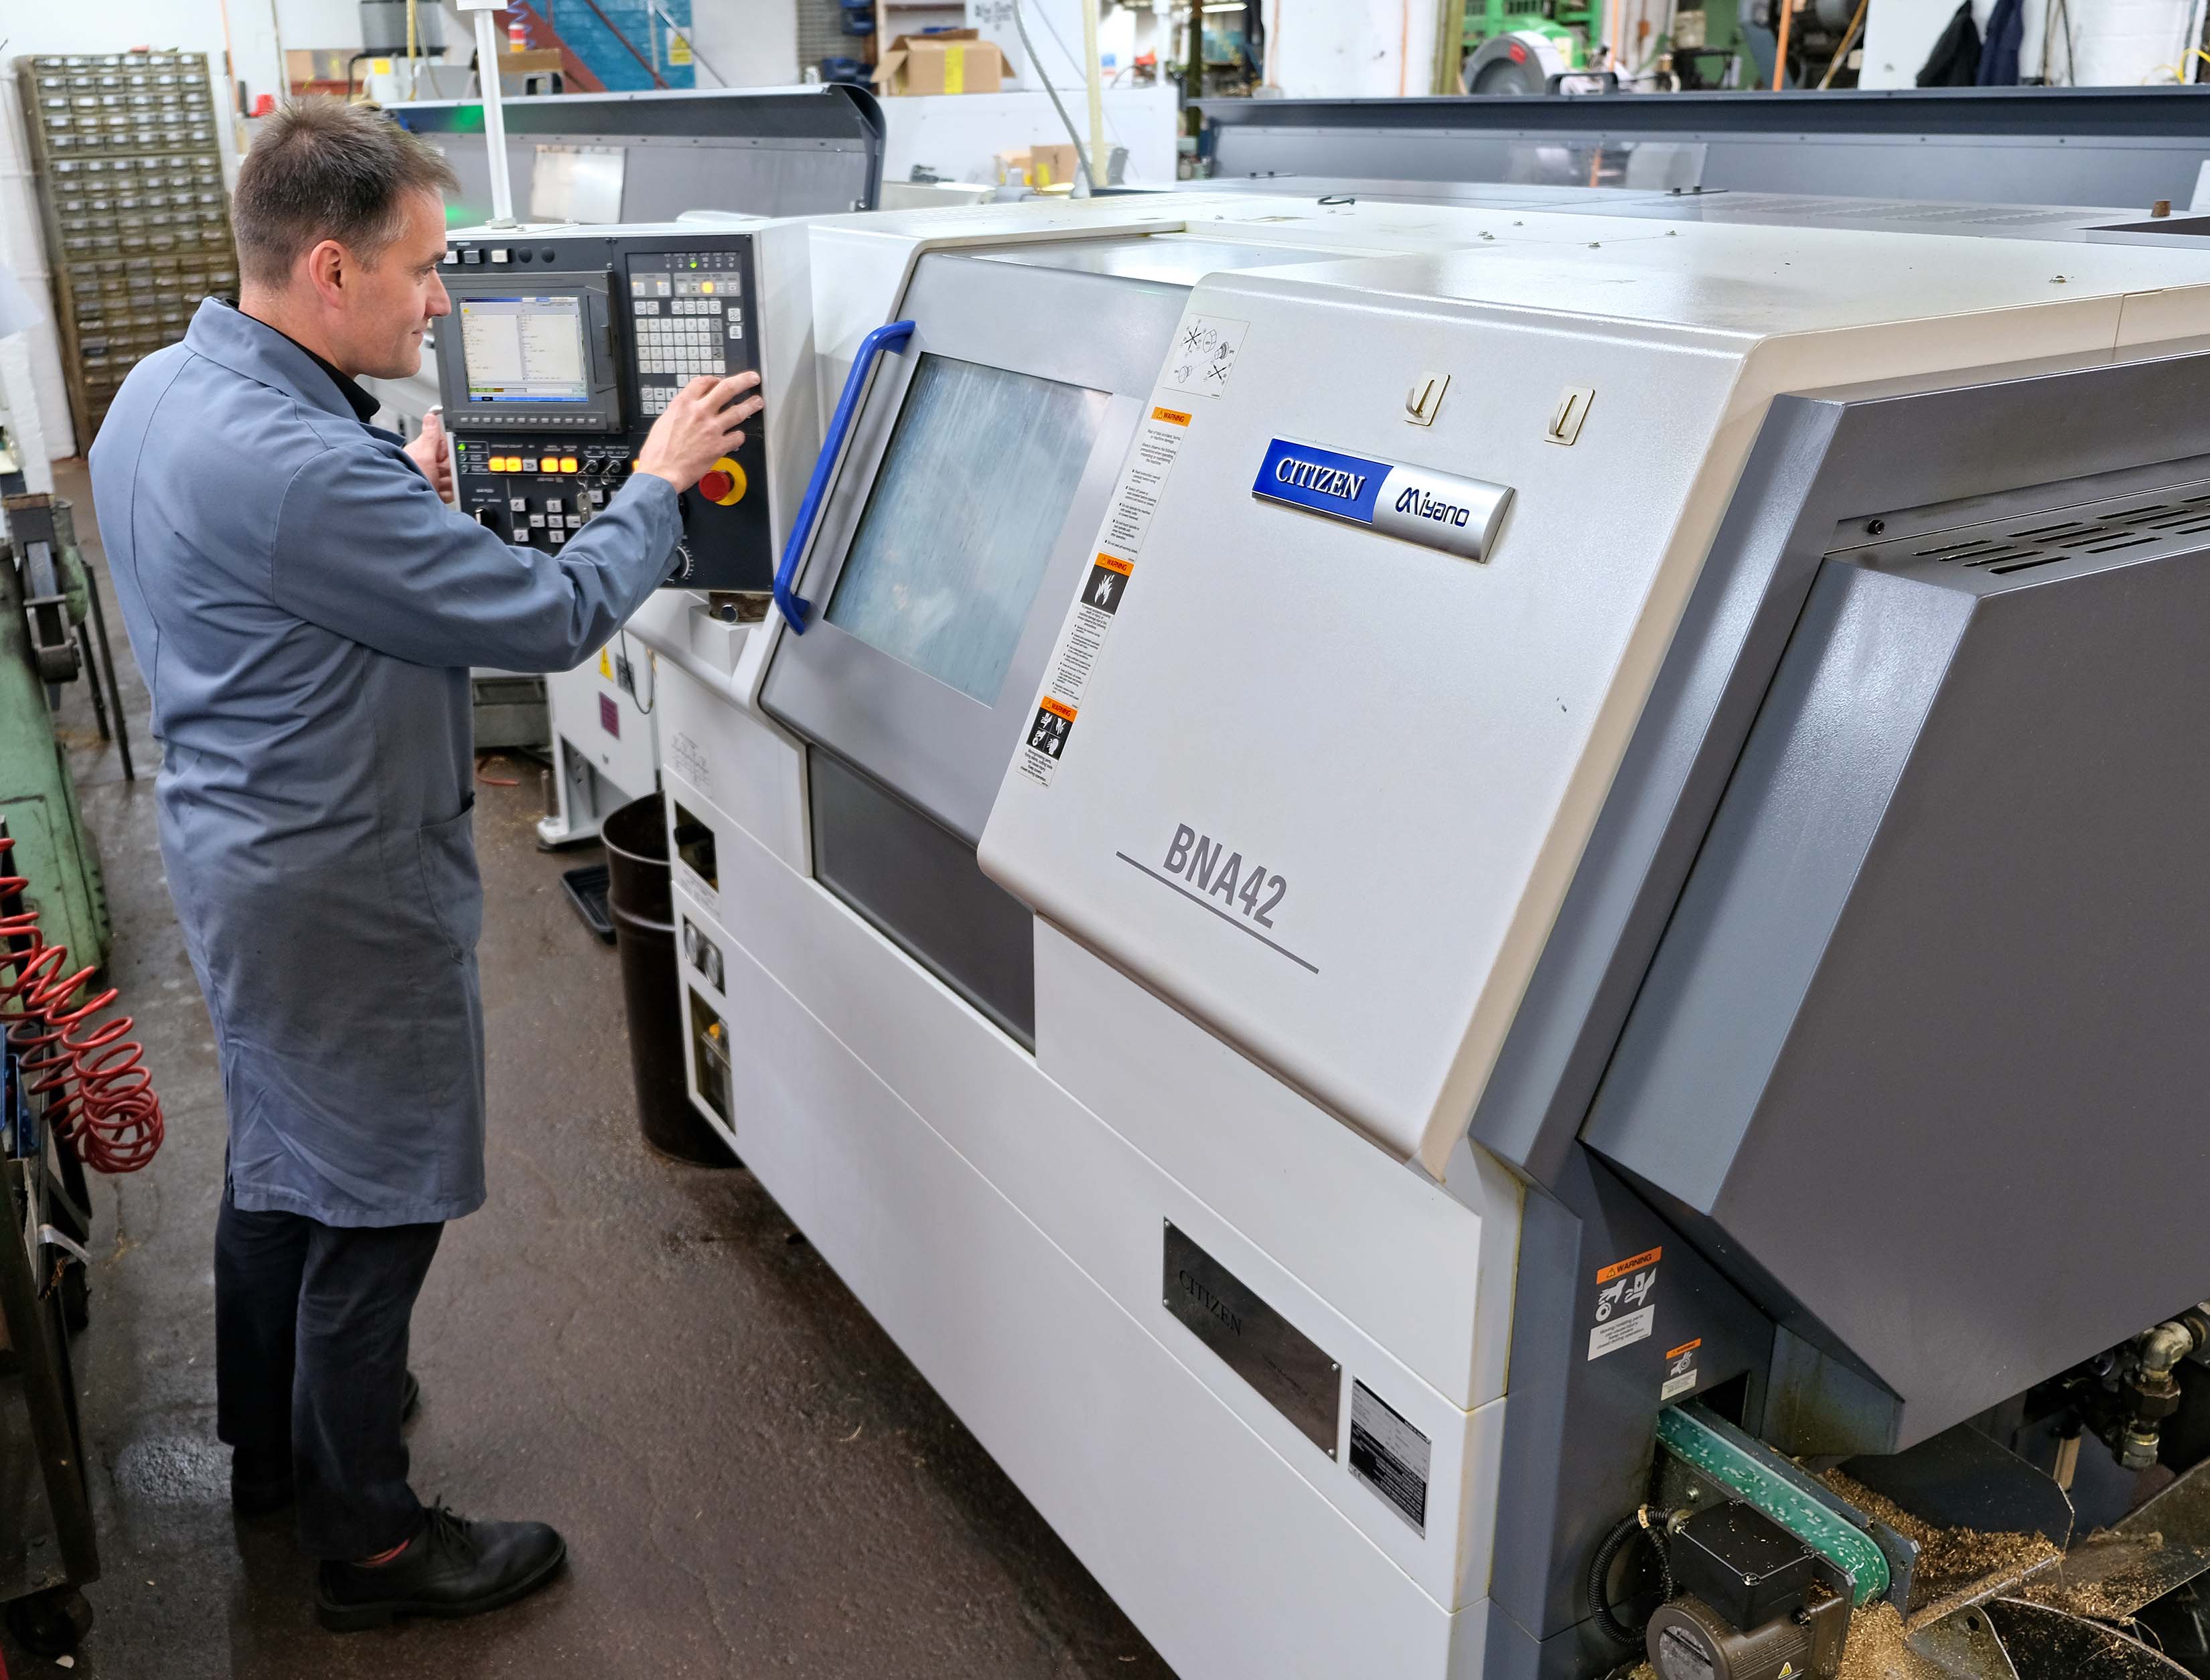 MANUFACTURER BUYS SLIDING-HEAD LATHES BUT MACHINES PARTS WITHOUT THE GUIDE BUSH